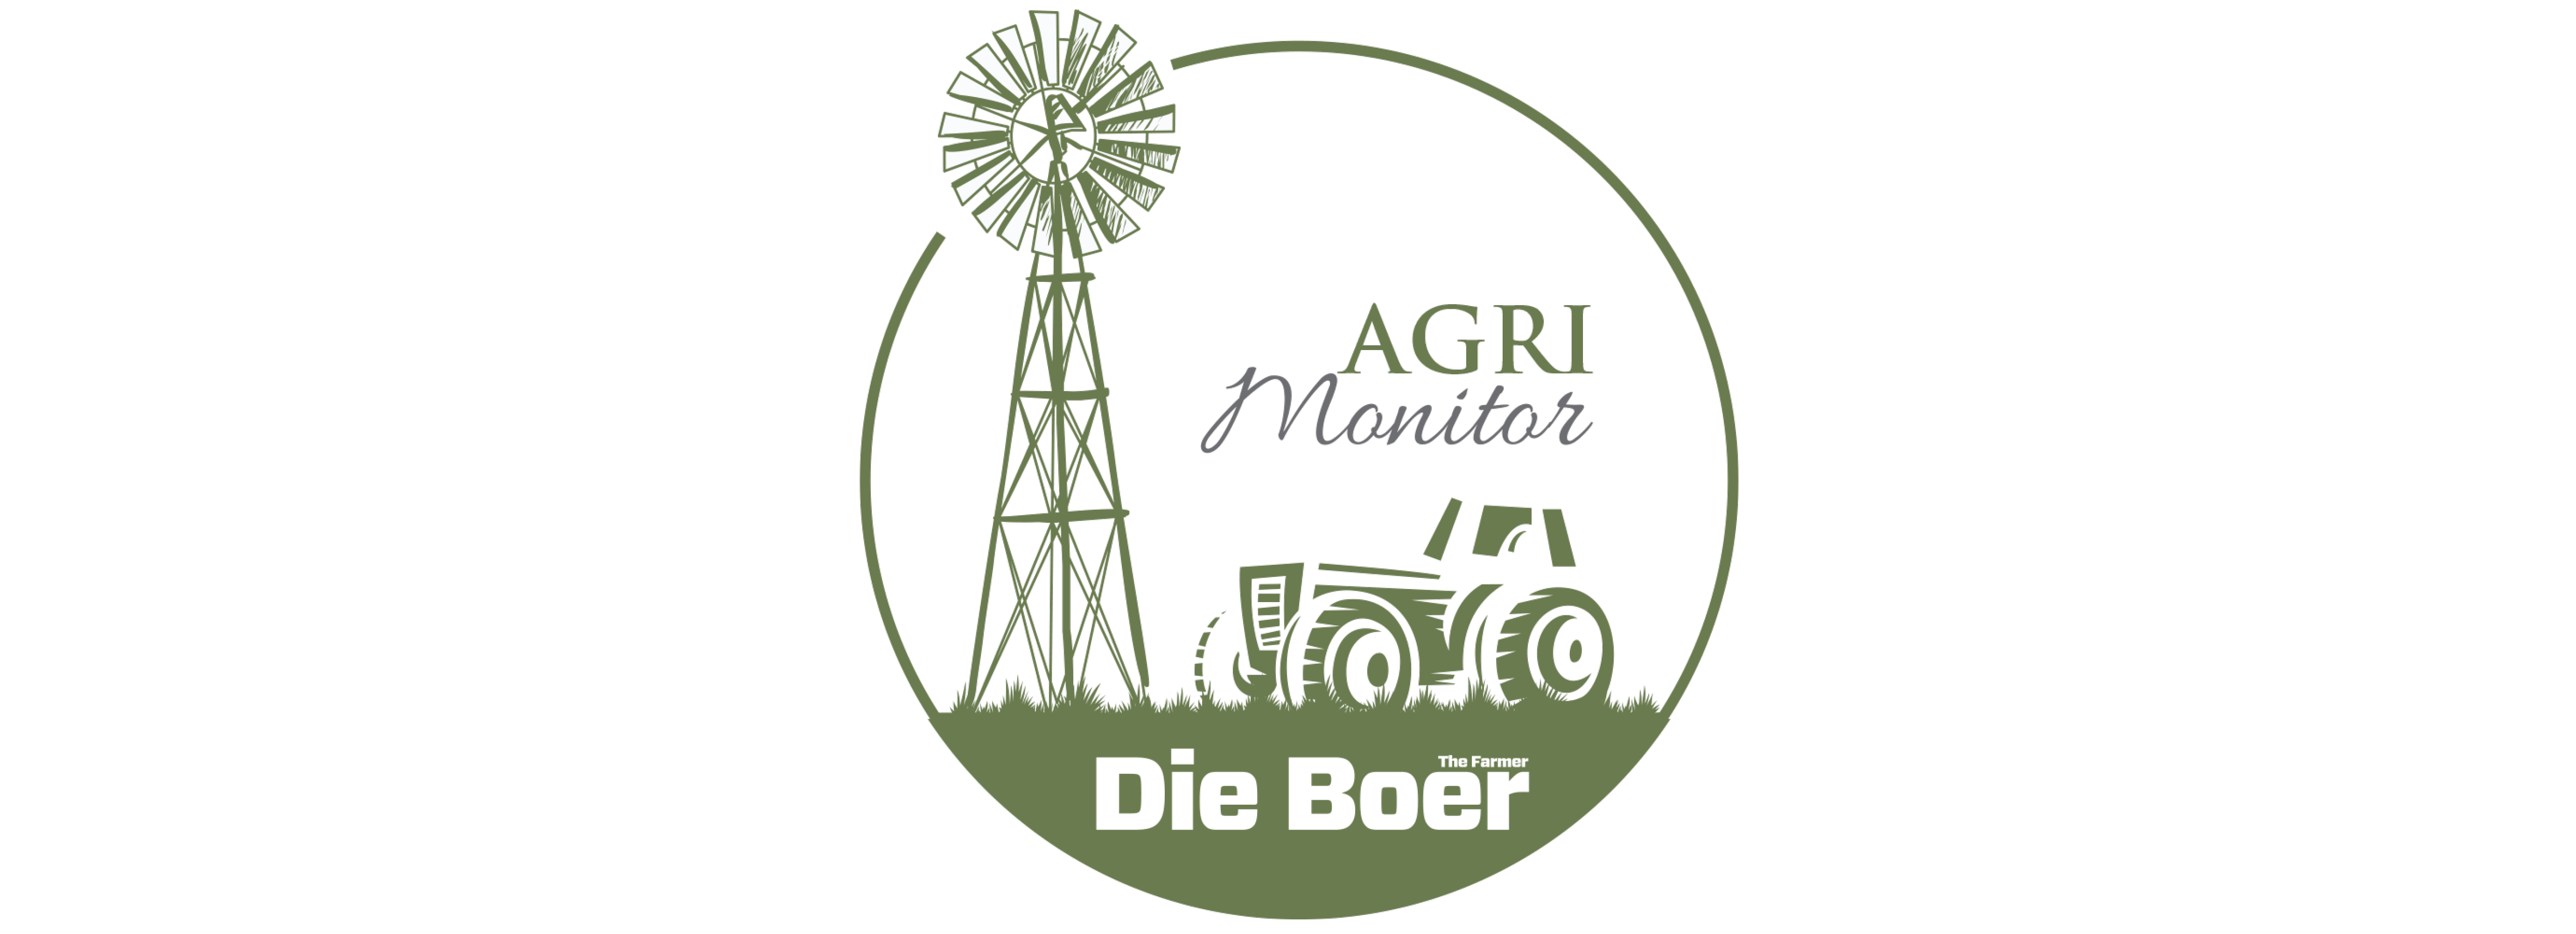 Agri Monitor - 17 August 2021 